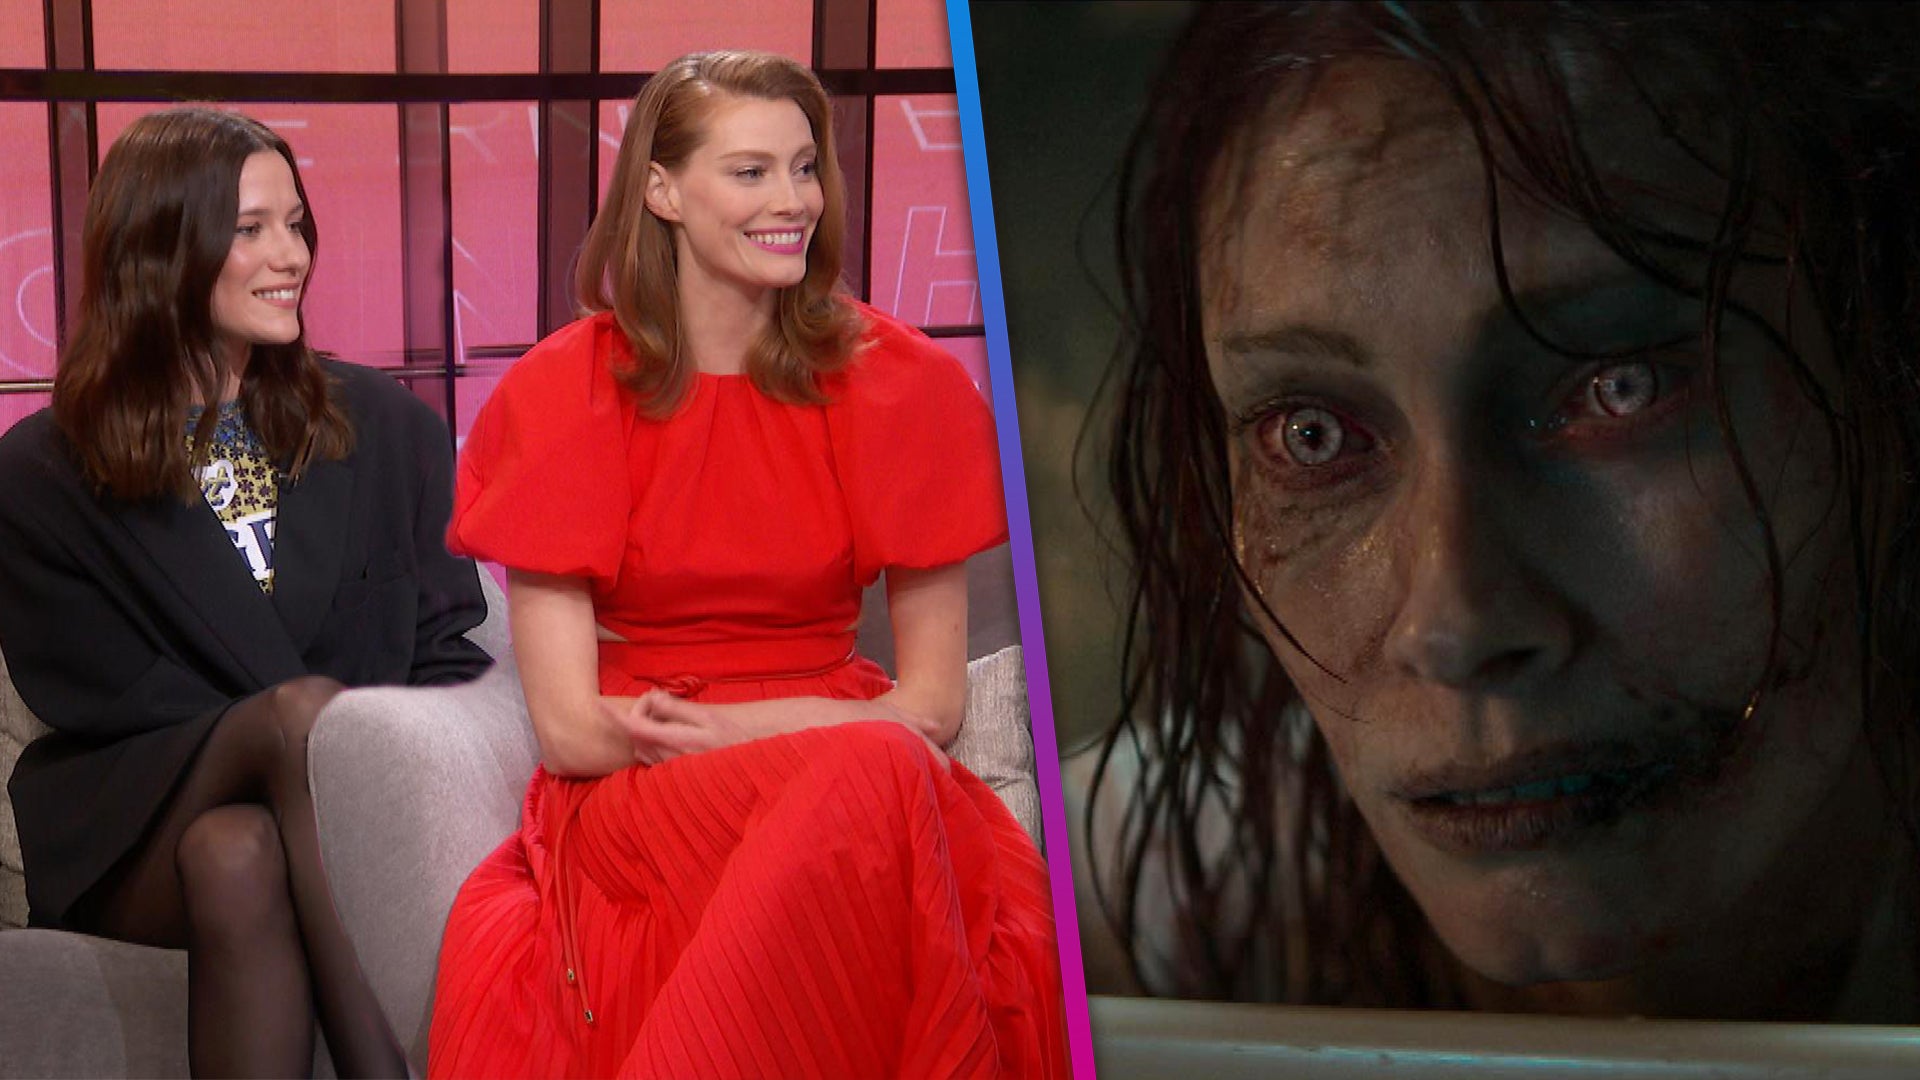 Evil Dead Rise Made Lily Sullivan Feel Like She Was In A Video Game